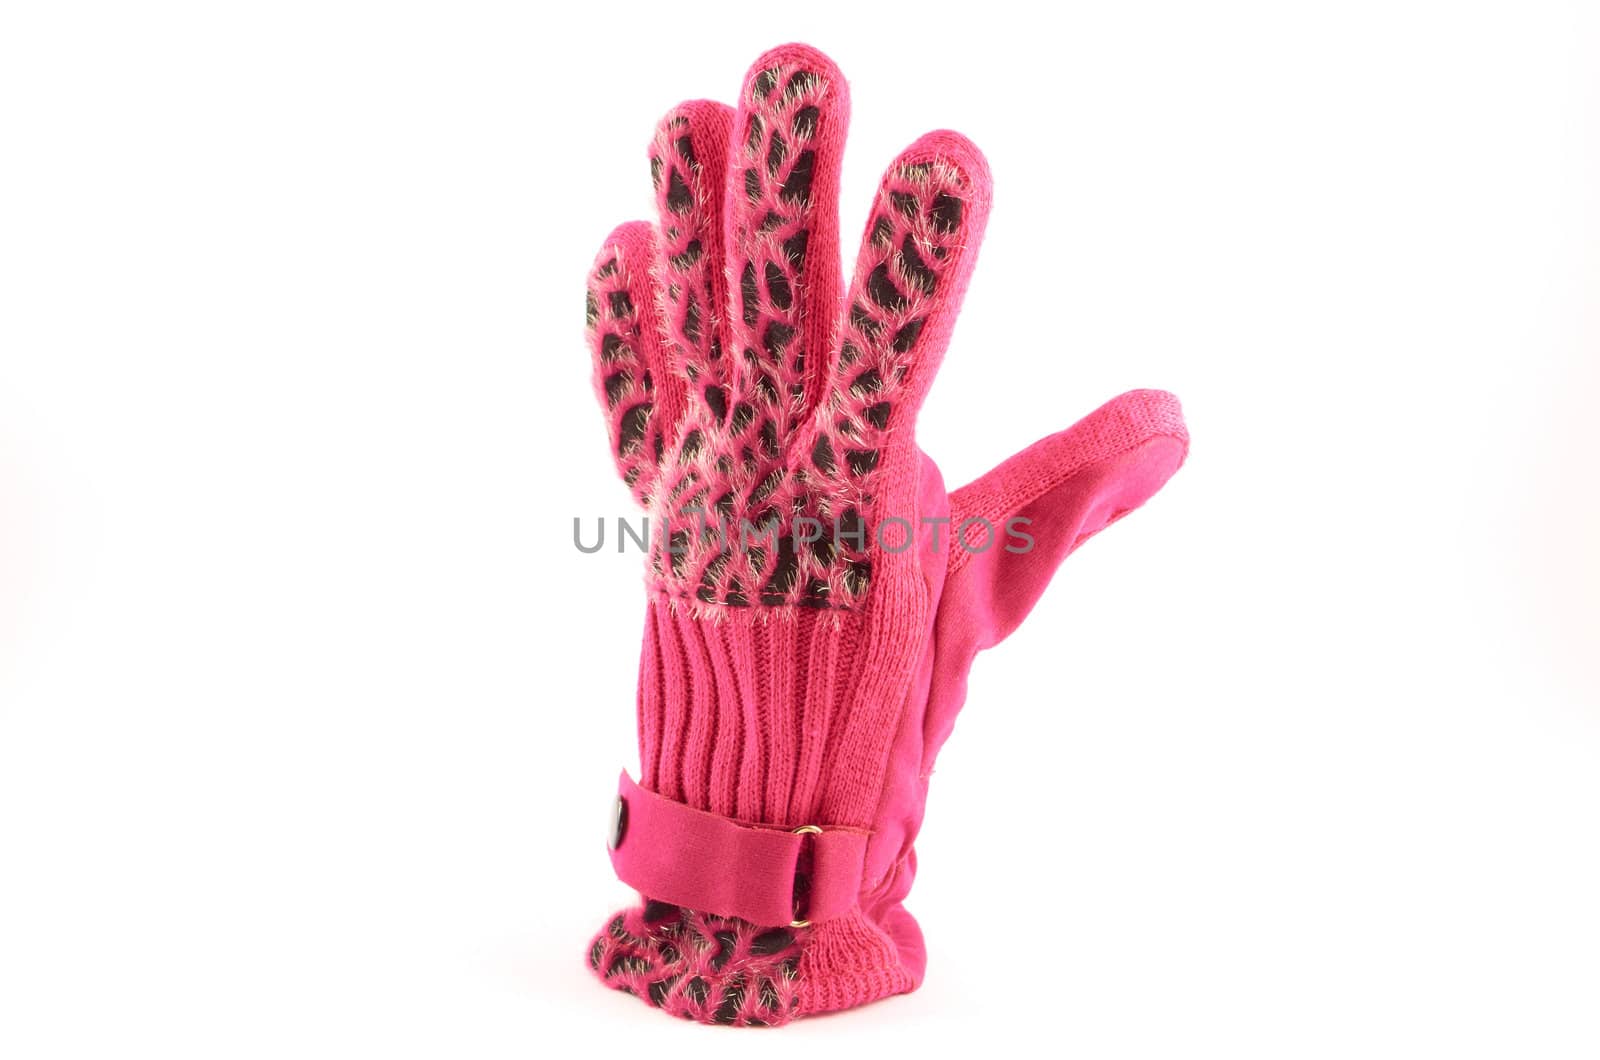 Glove by subos